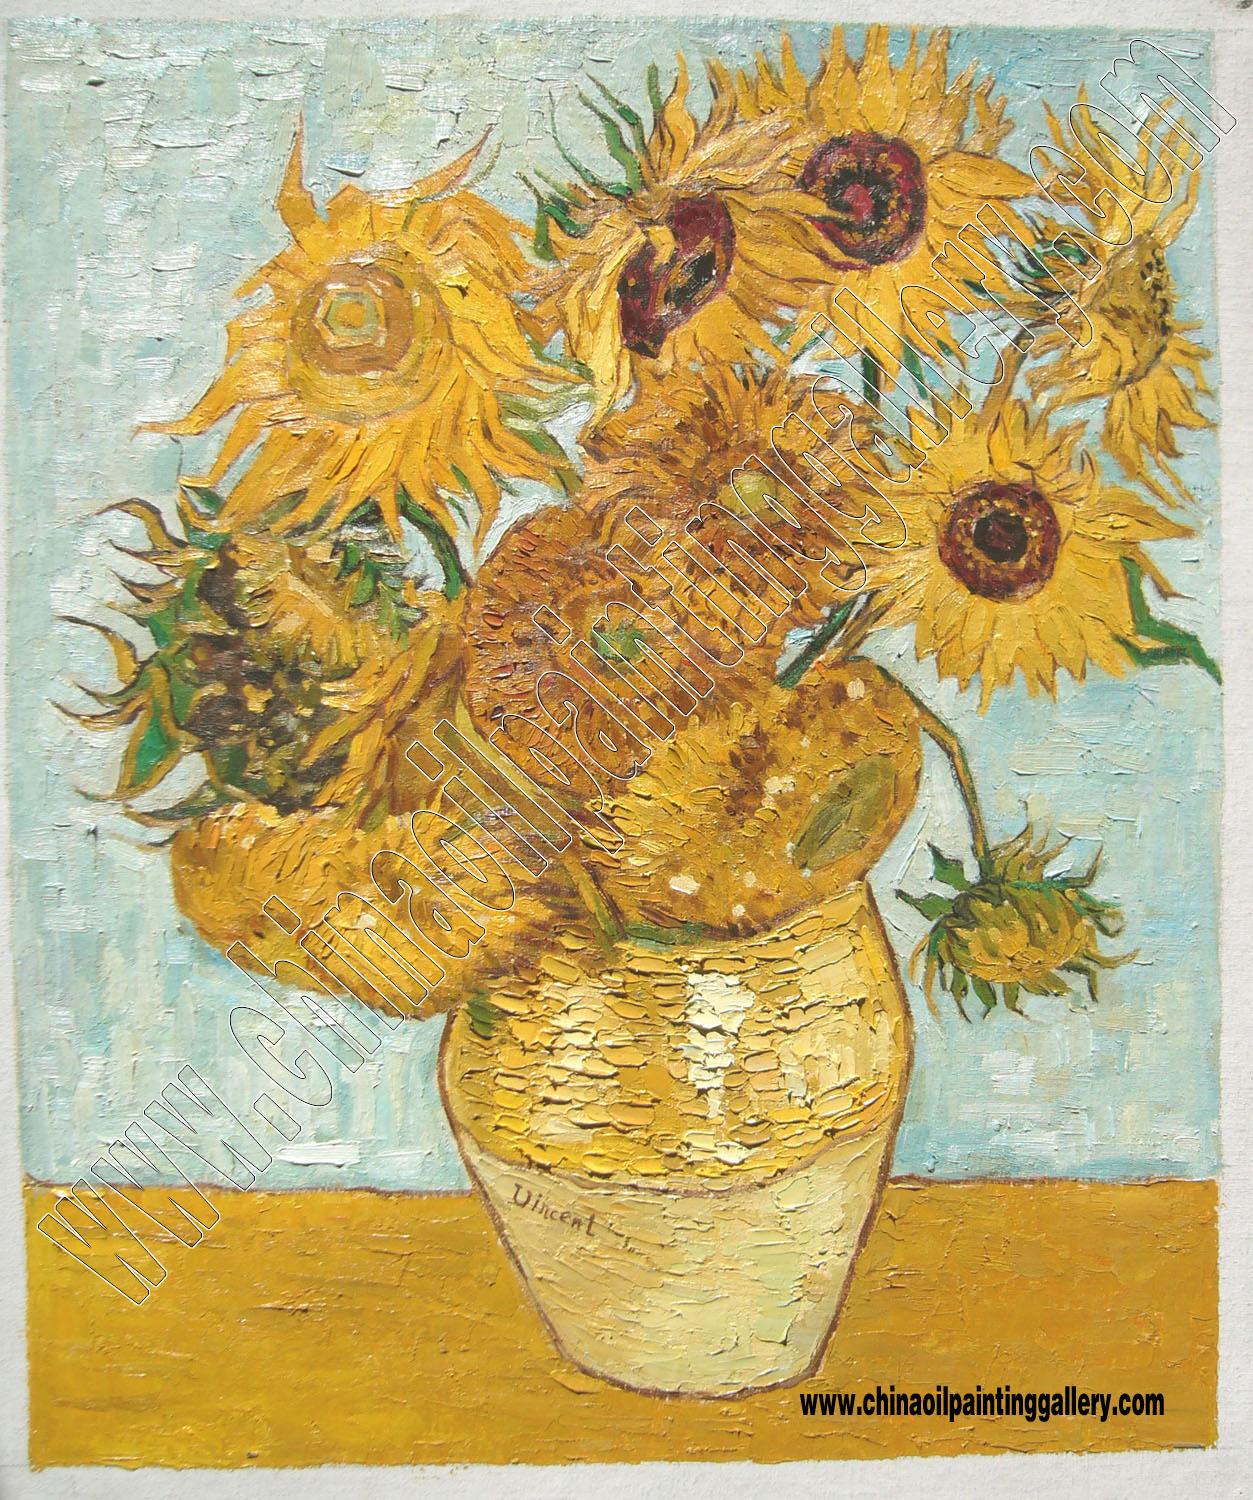 Vincent van Gogh Sunflowers - Oil painting reproductions 4